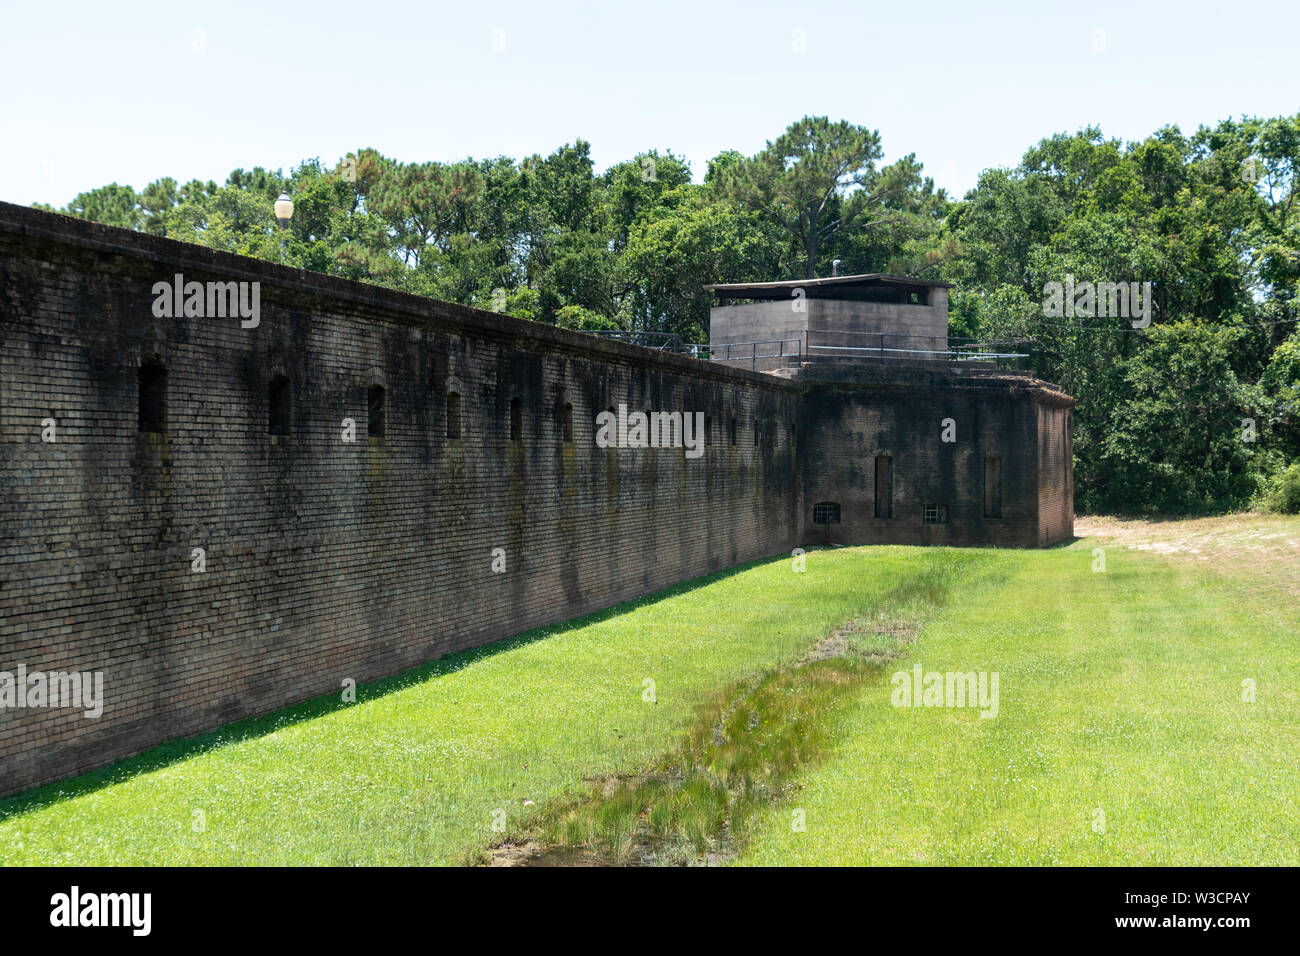 The walls of Fort Gains built to defend Mobile bay and was used in the Civil War Stock Photo